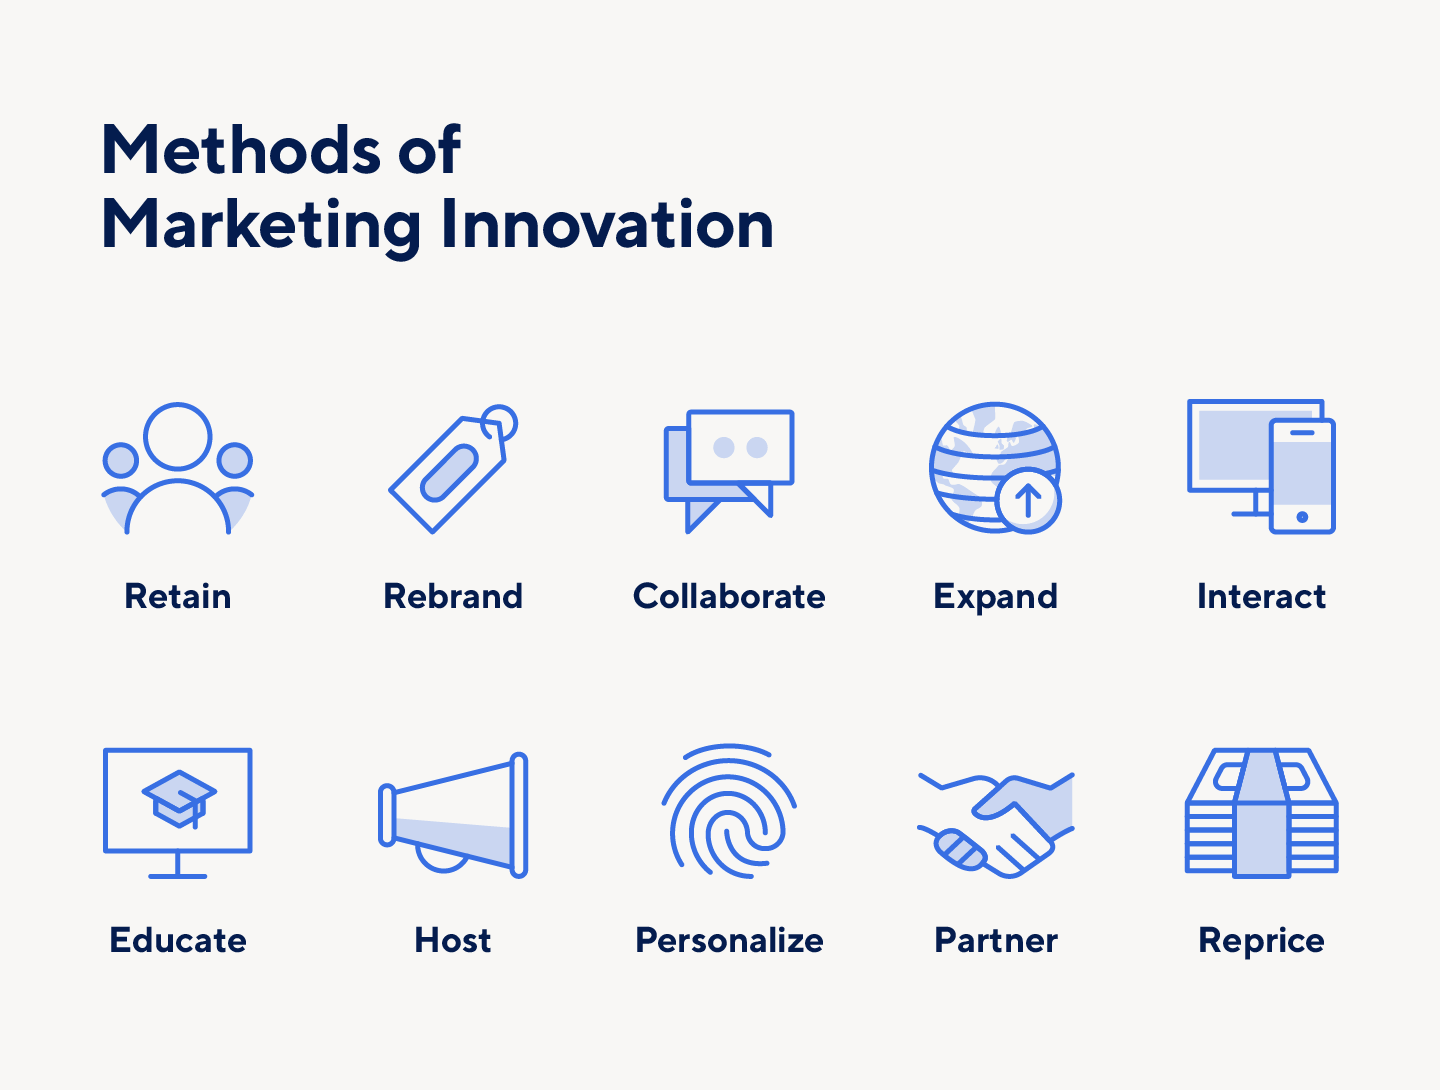 The methods of marketing innovations include rebranding, educating, and more.